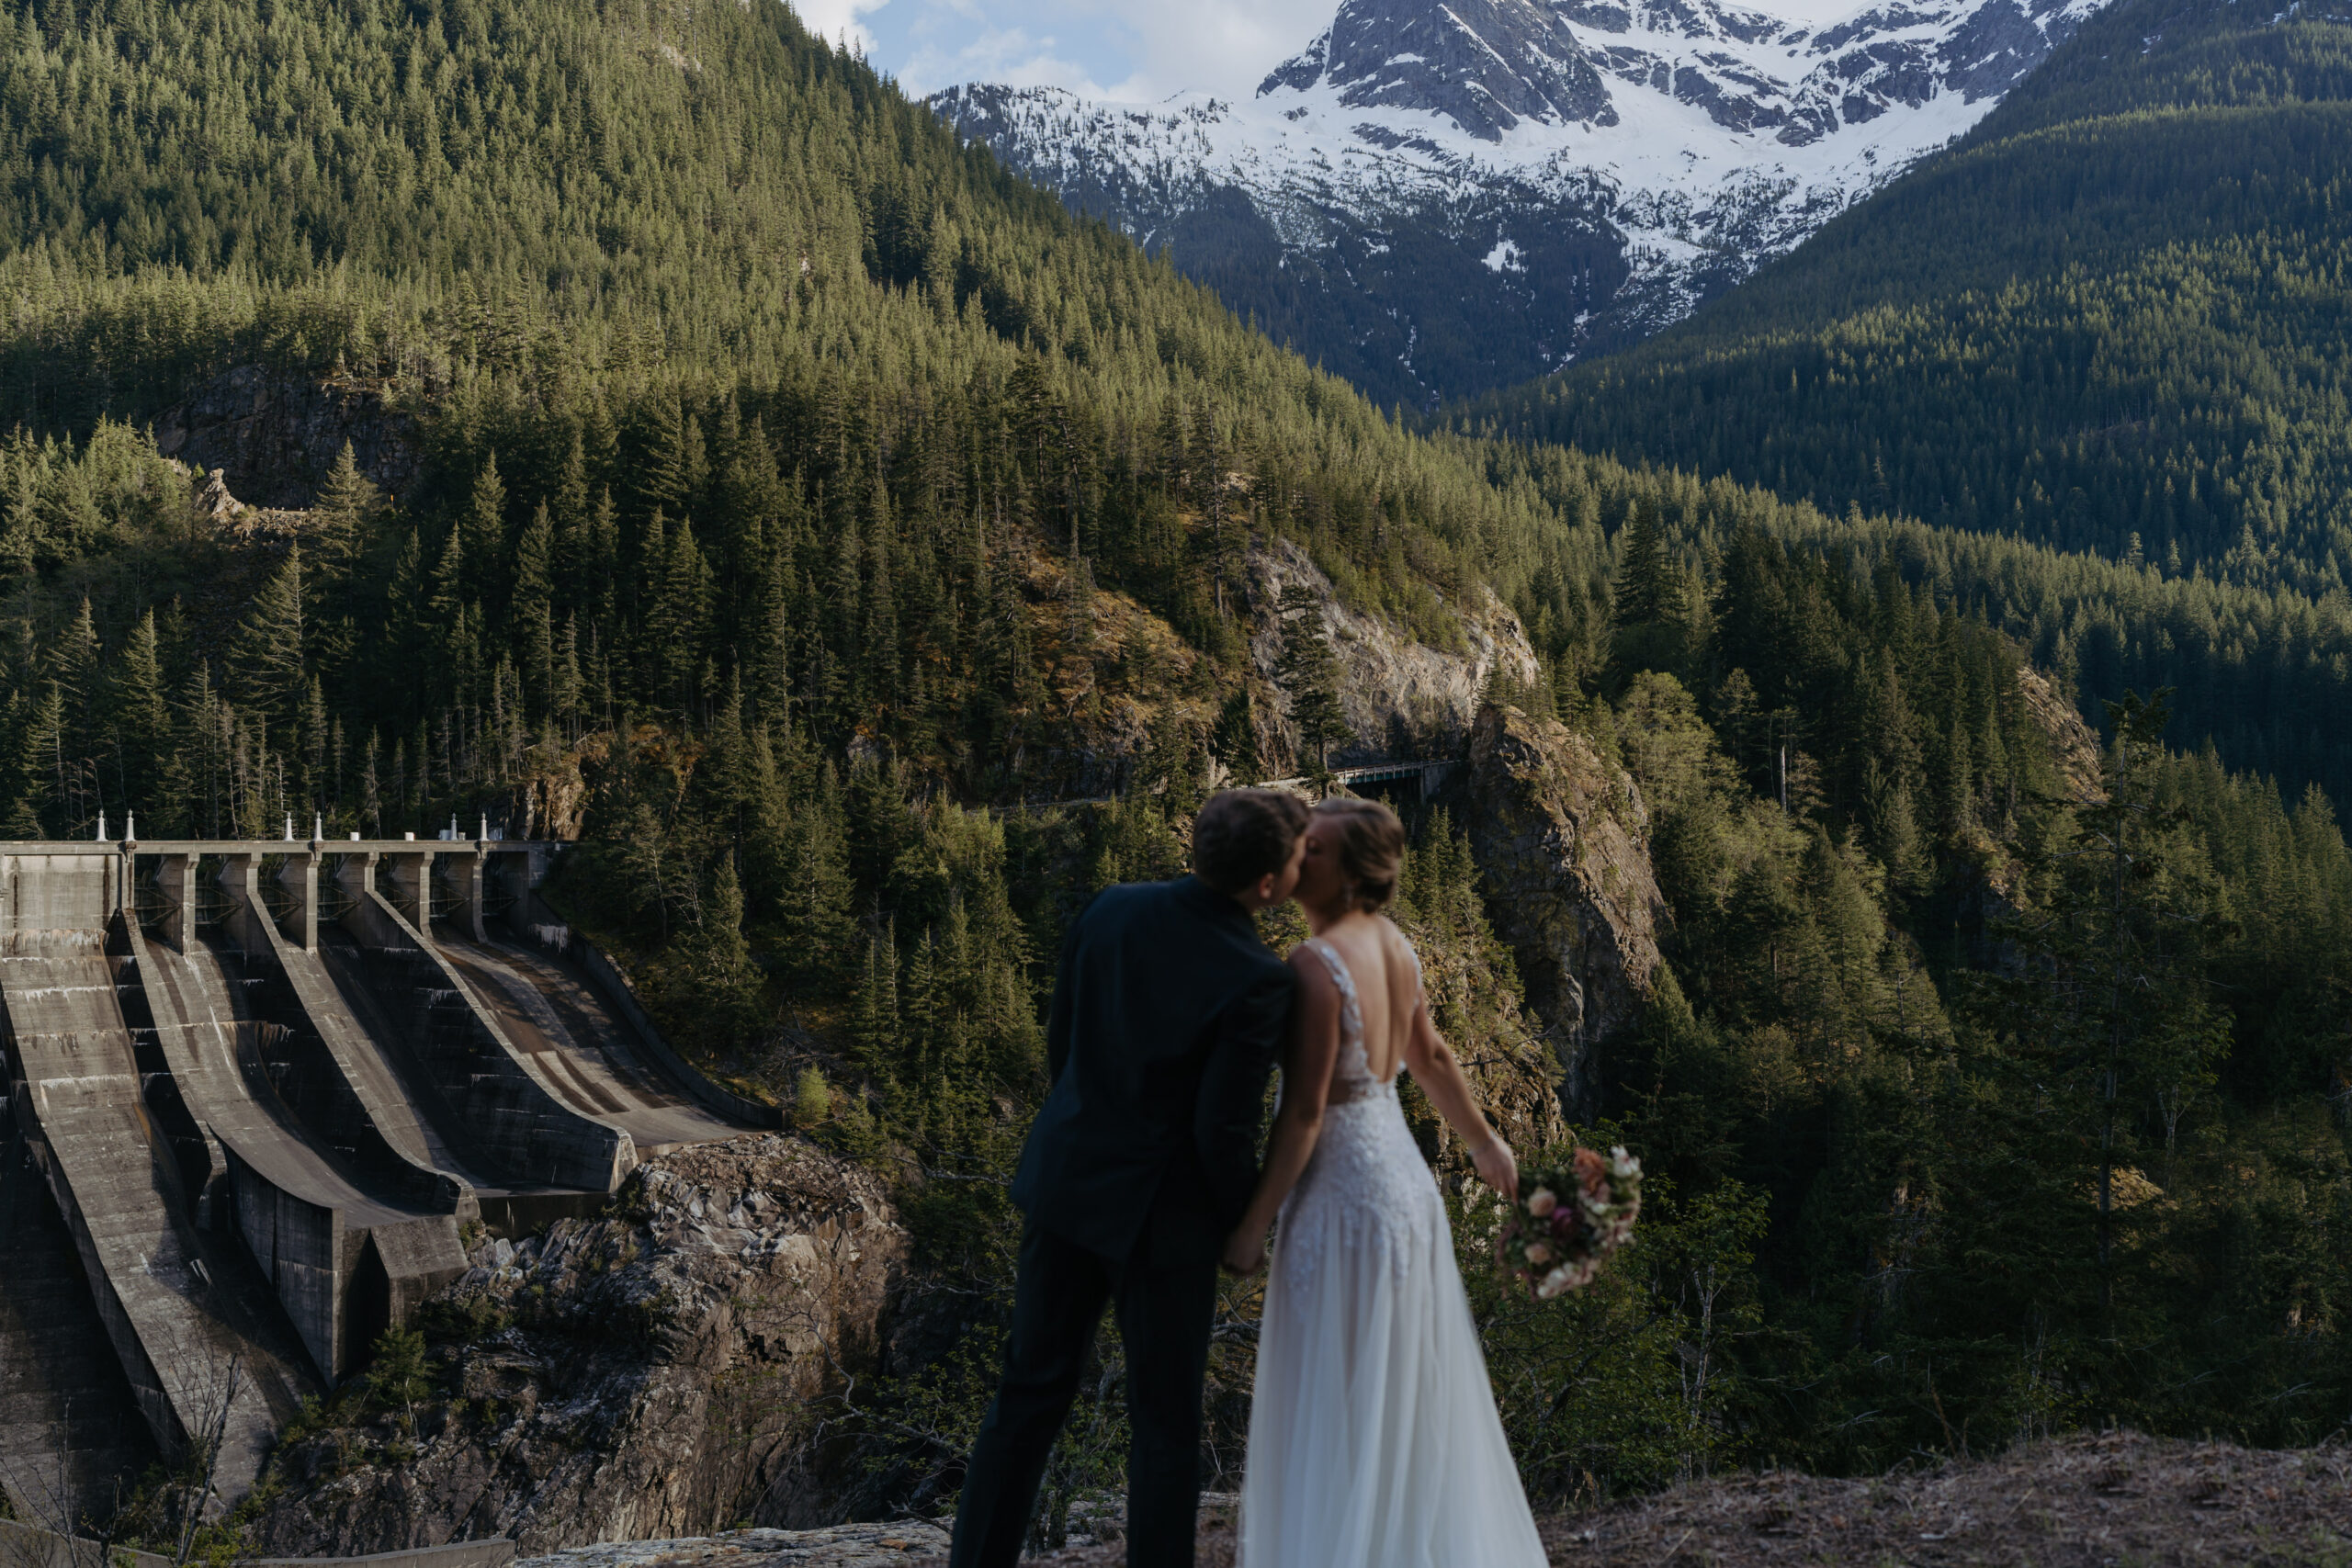 A couple eloping in the north cascades of Washington state. They are kissing with a view of the mountains in the background.